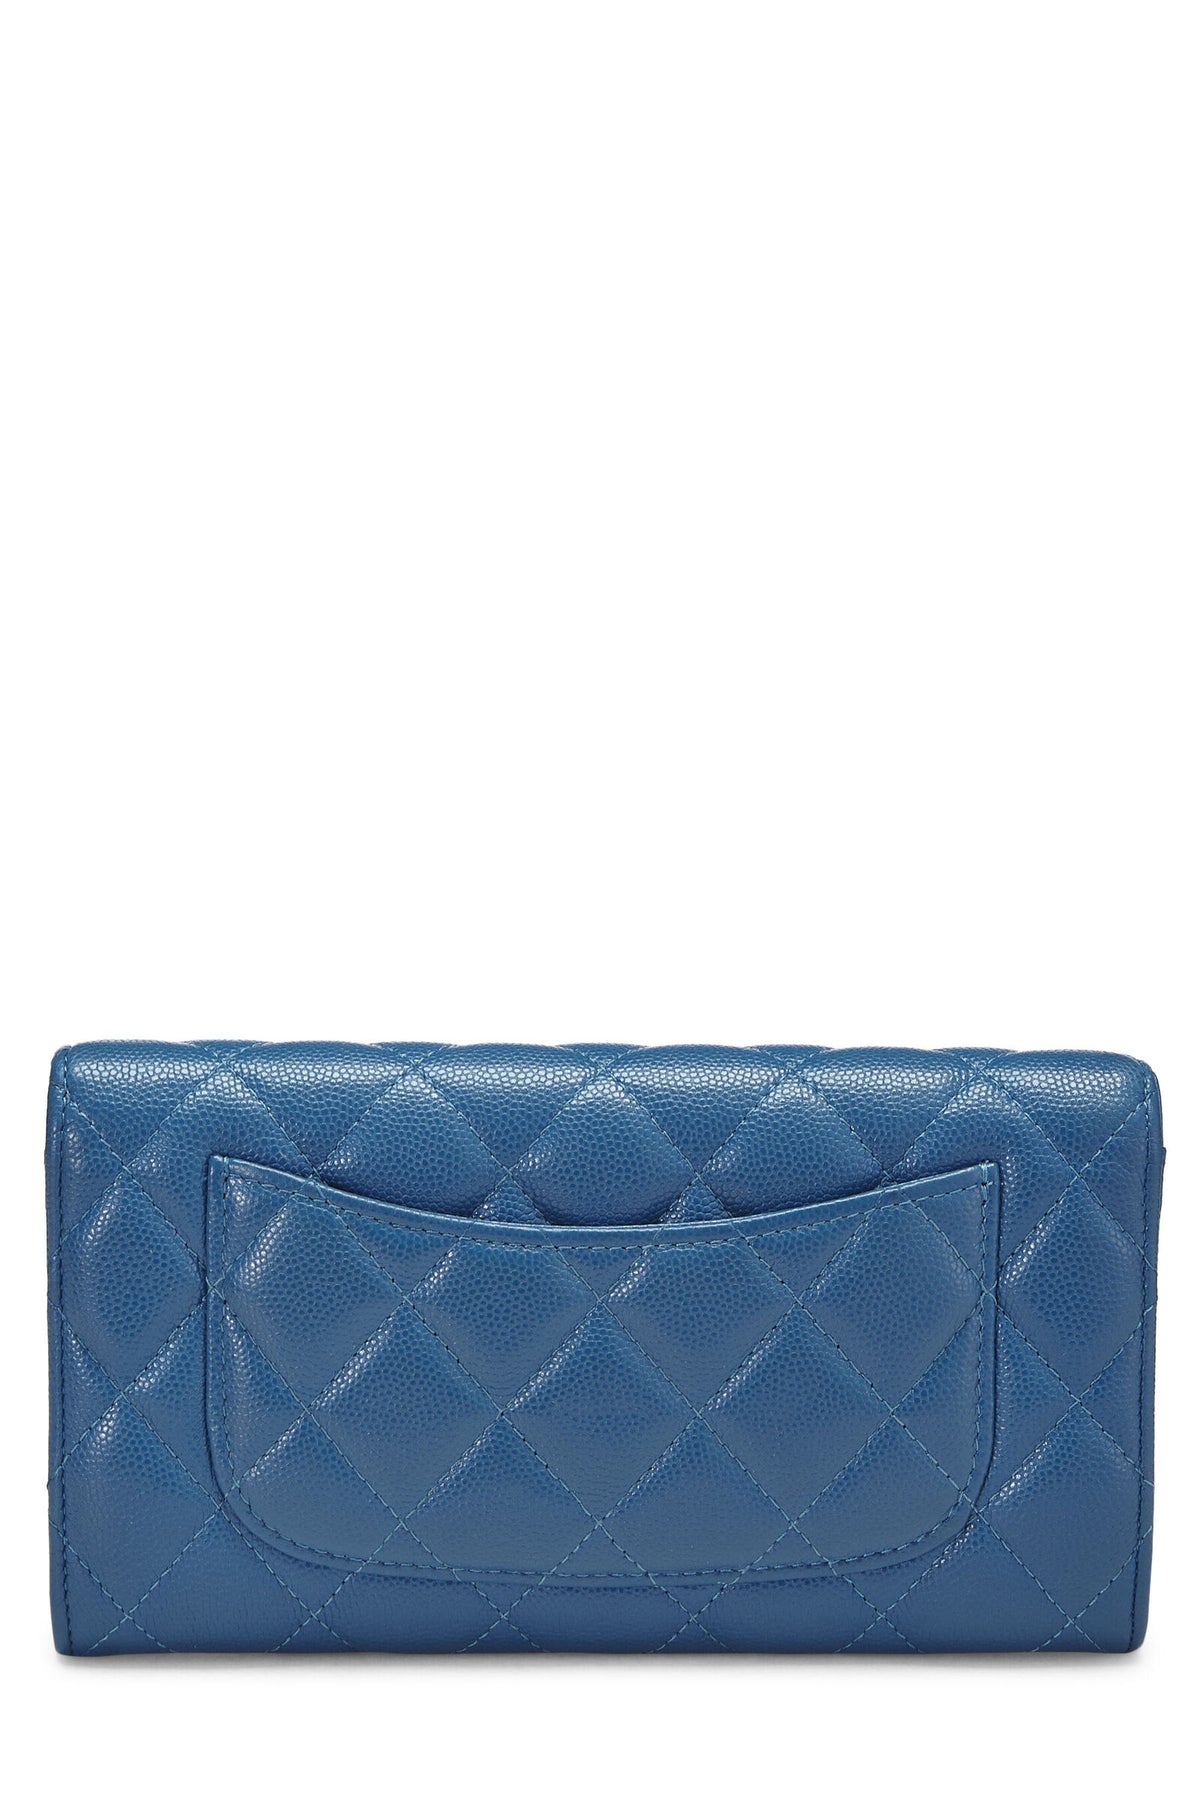 CHANEL CAVIAR QUILTED LAMBSKIN CLASSIC FLAP WALLET – Caroline's Fashion  Luxuries